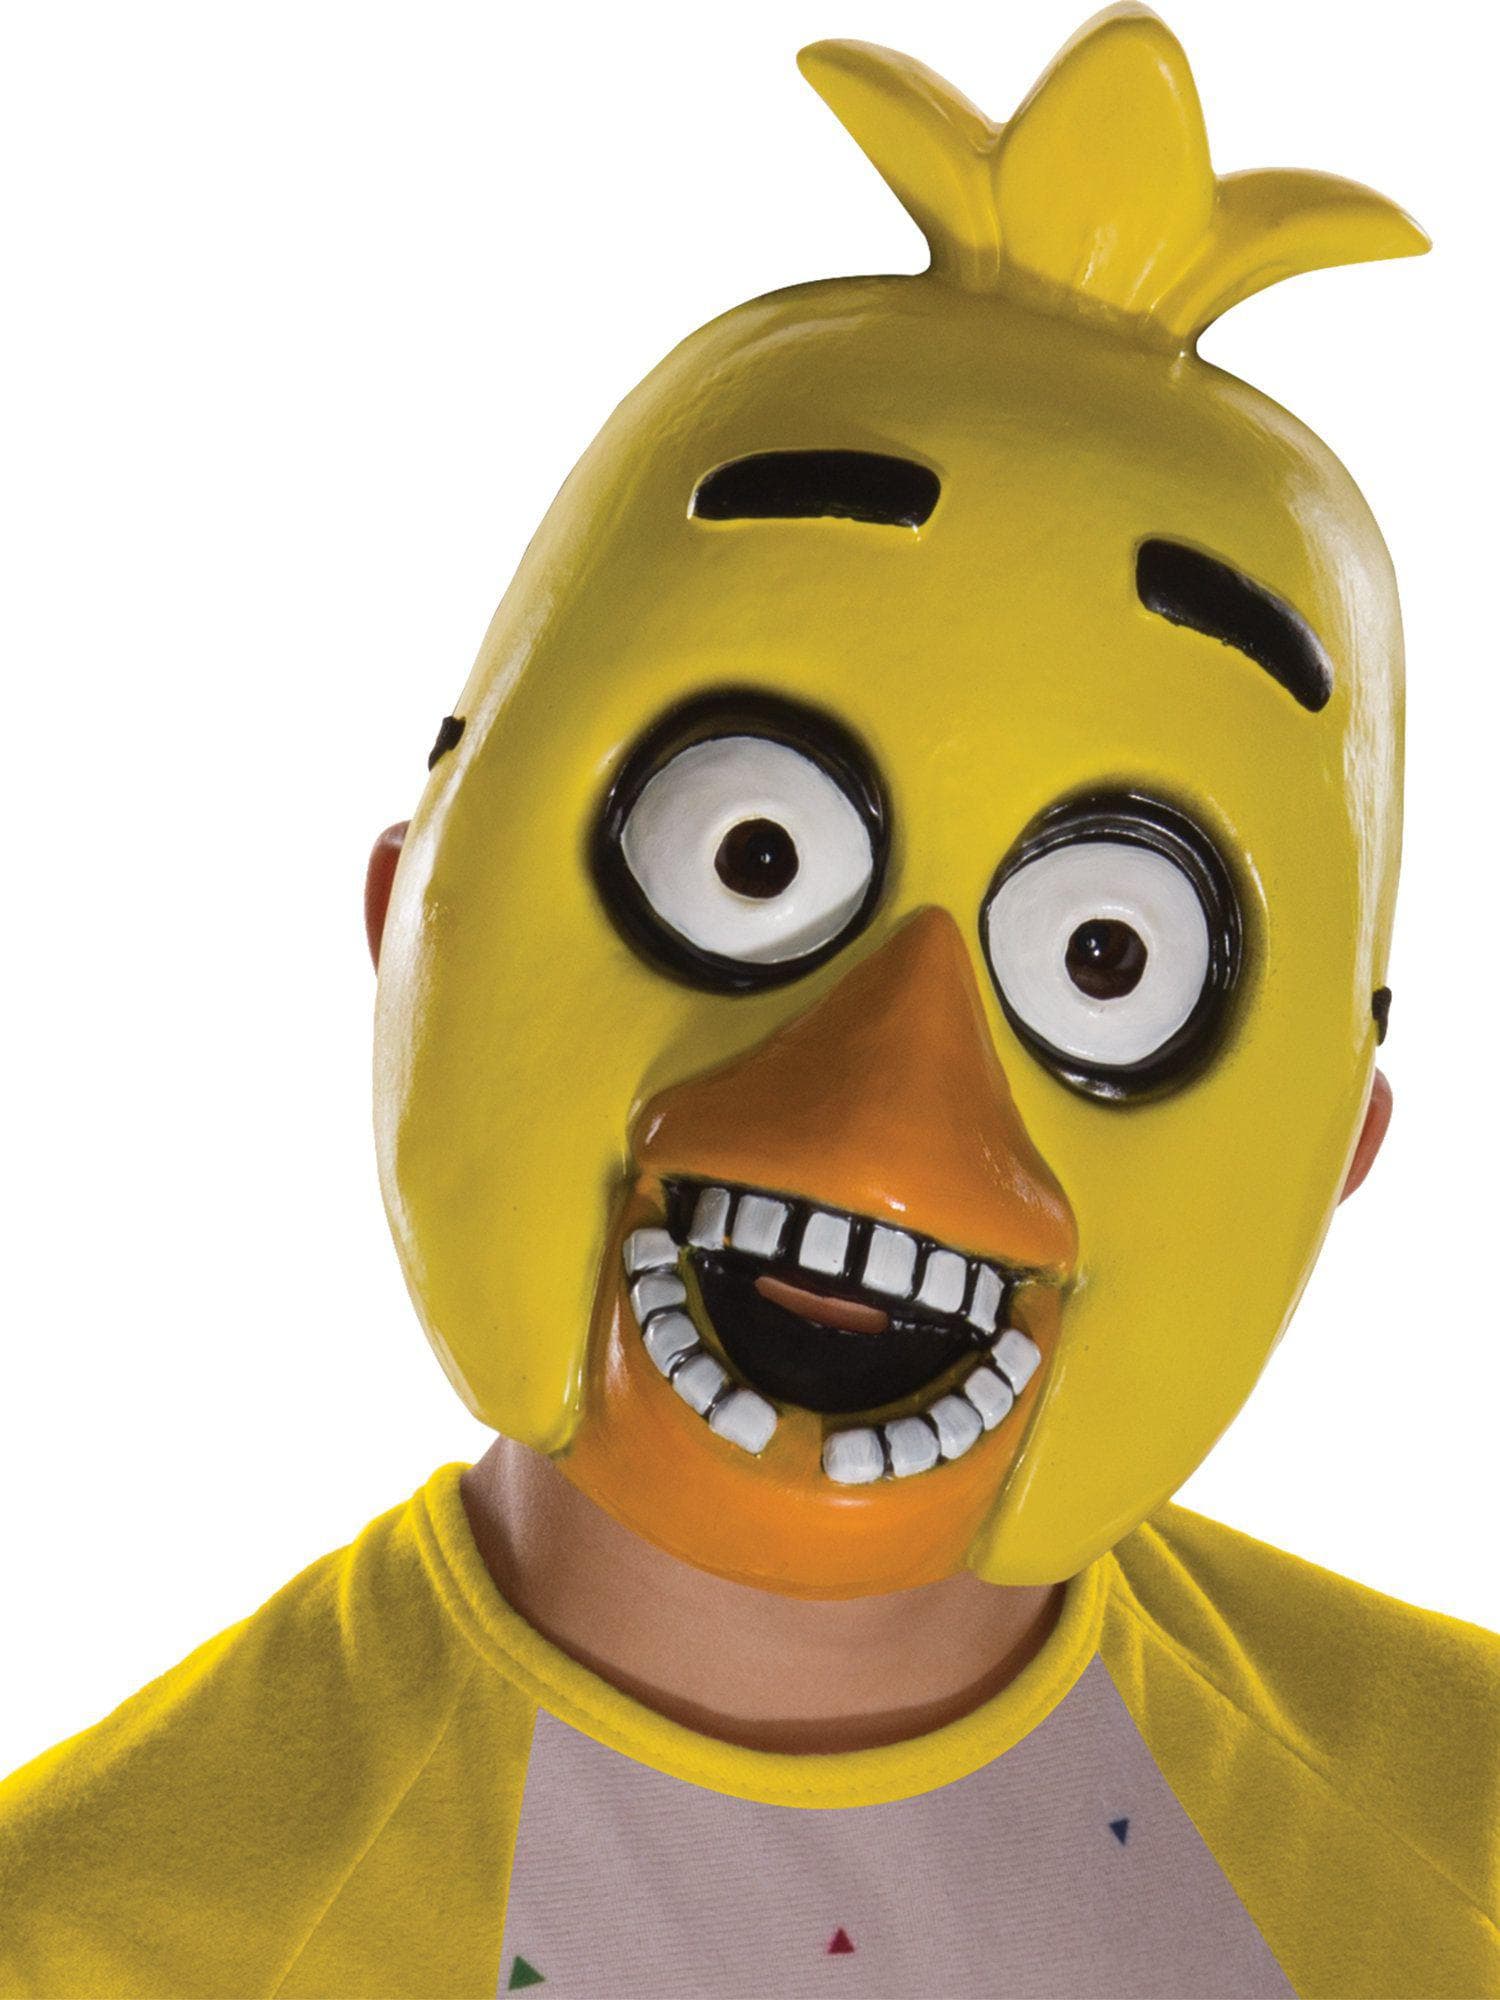 Kids' Five Nights at Freddy's Chica Half Mask - costumes.com